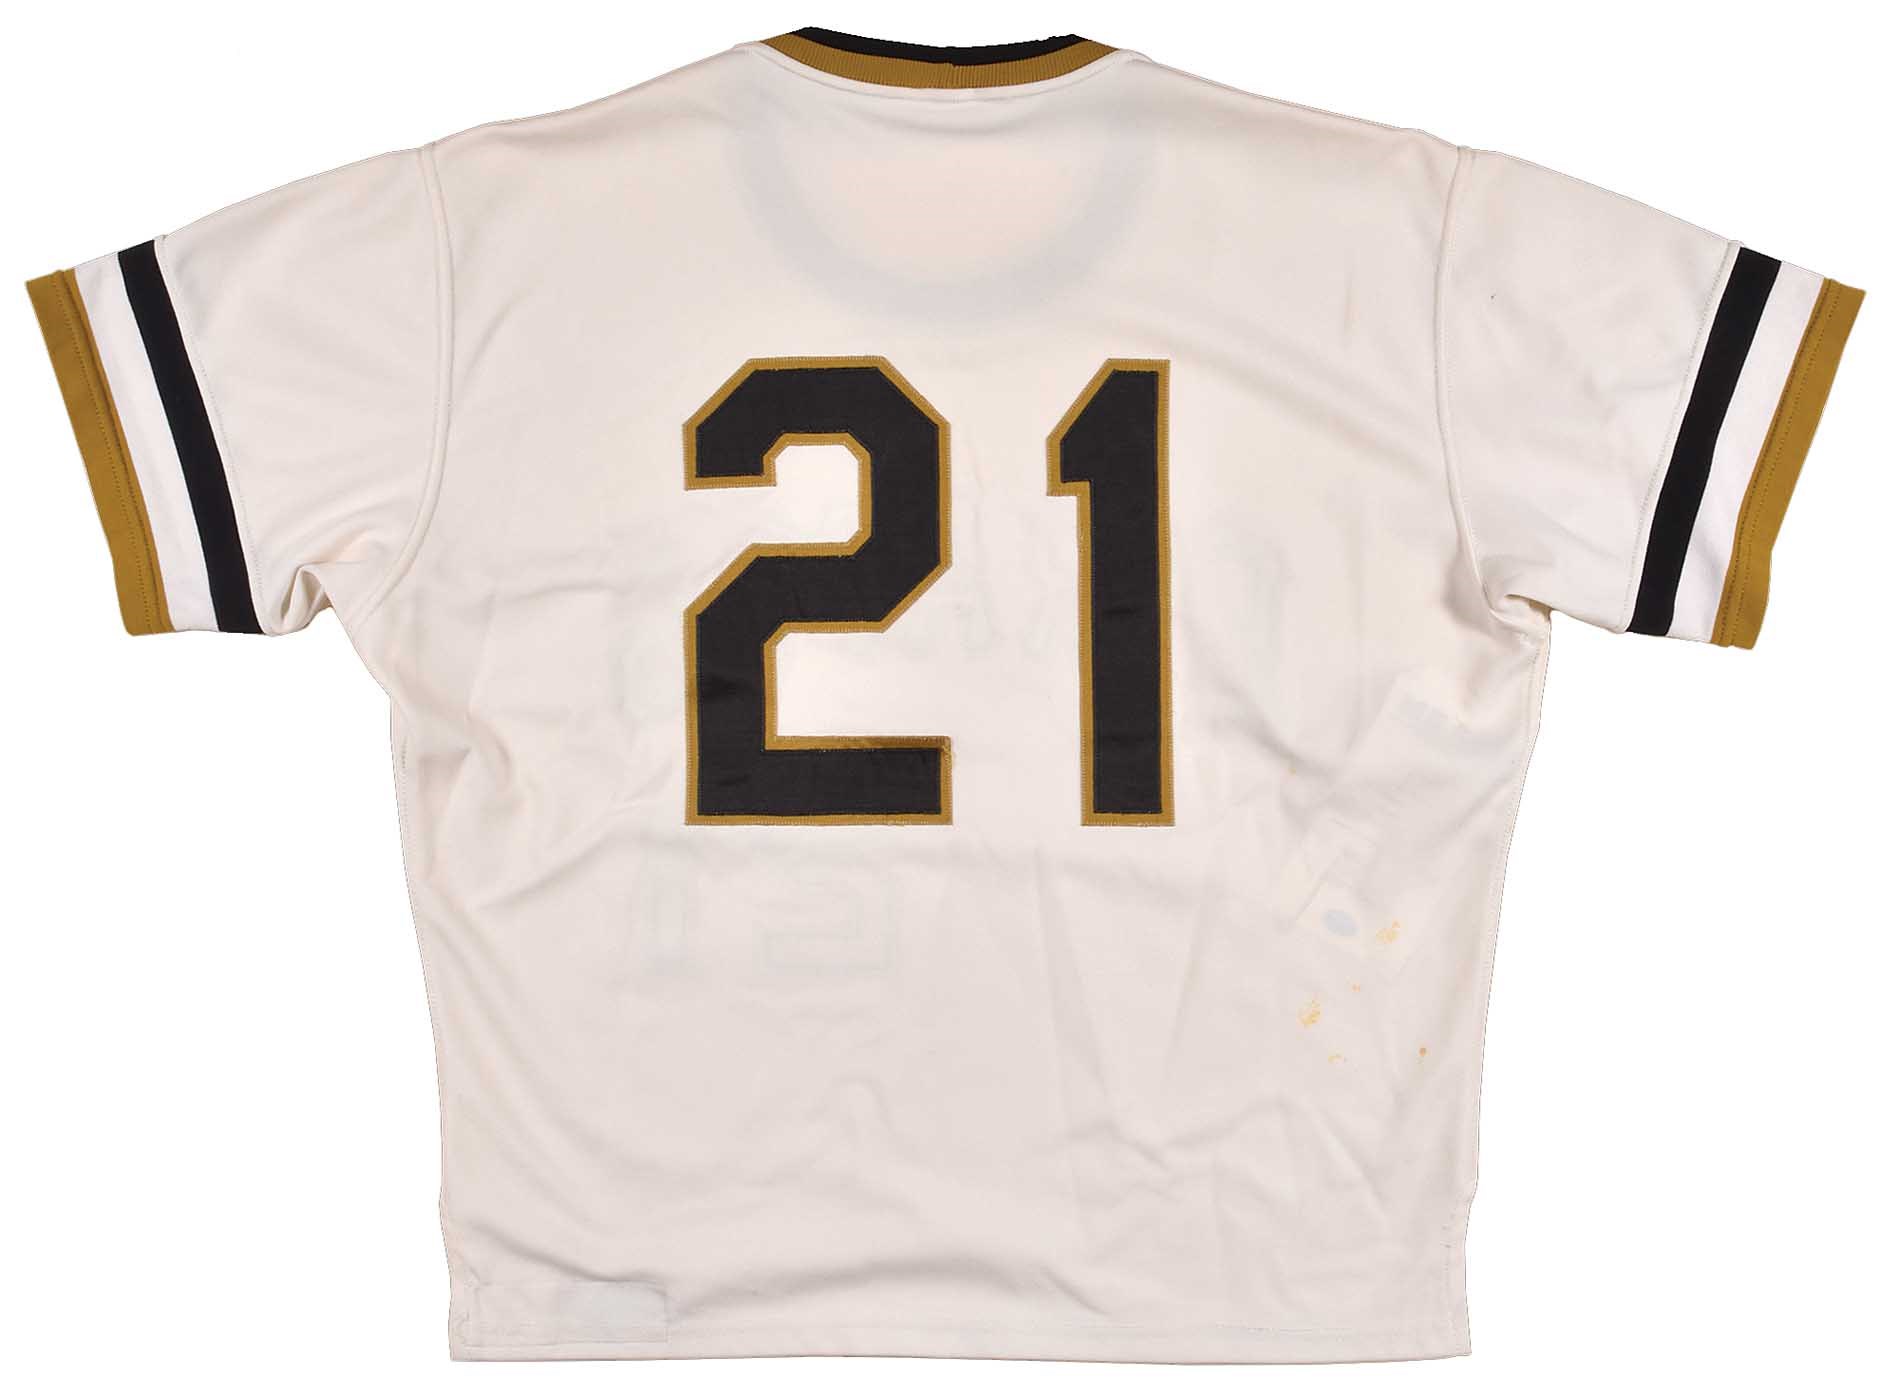 Pittsburgh Pirates - Our Roberto Clemente Day game-used jerseys are up for  auction now! Proceeds benefit Pirates Charities and the Roberto Clemente  Foundation. Bid